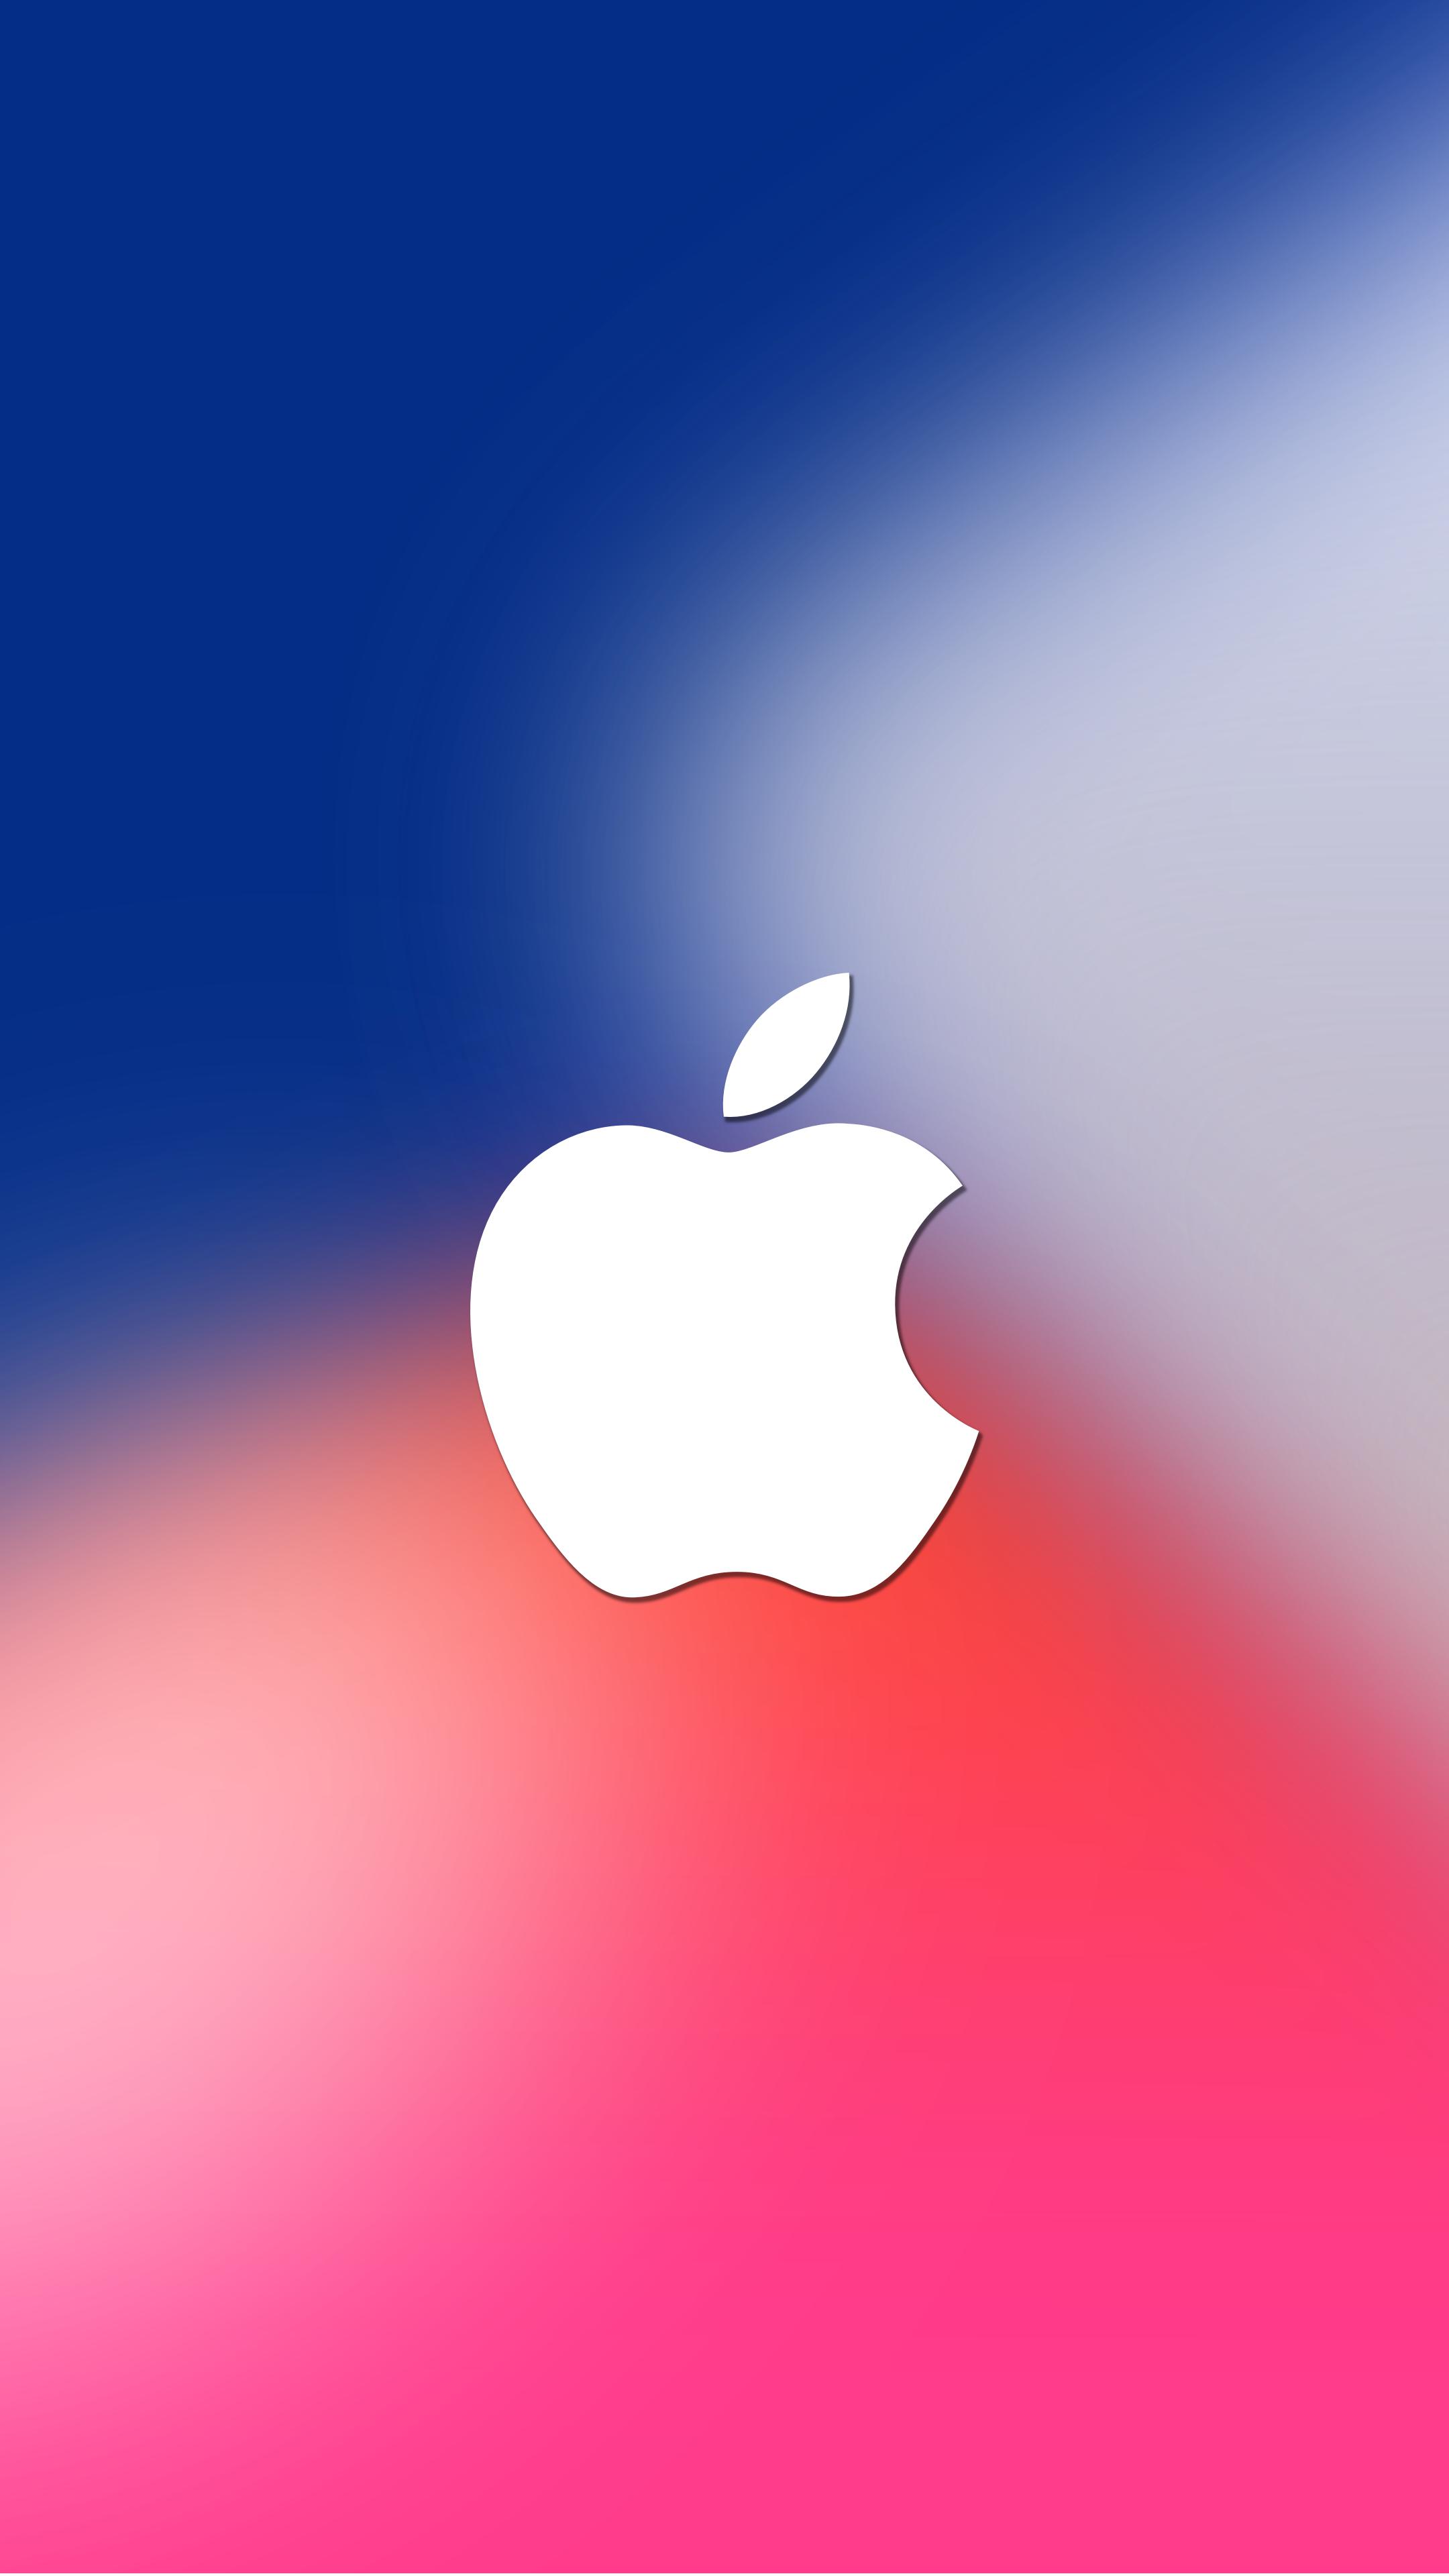 Blueand White Apple Logo - Download September 12 iPhone 8 Event Wallpapers For iPhone, iPad and ...